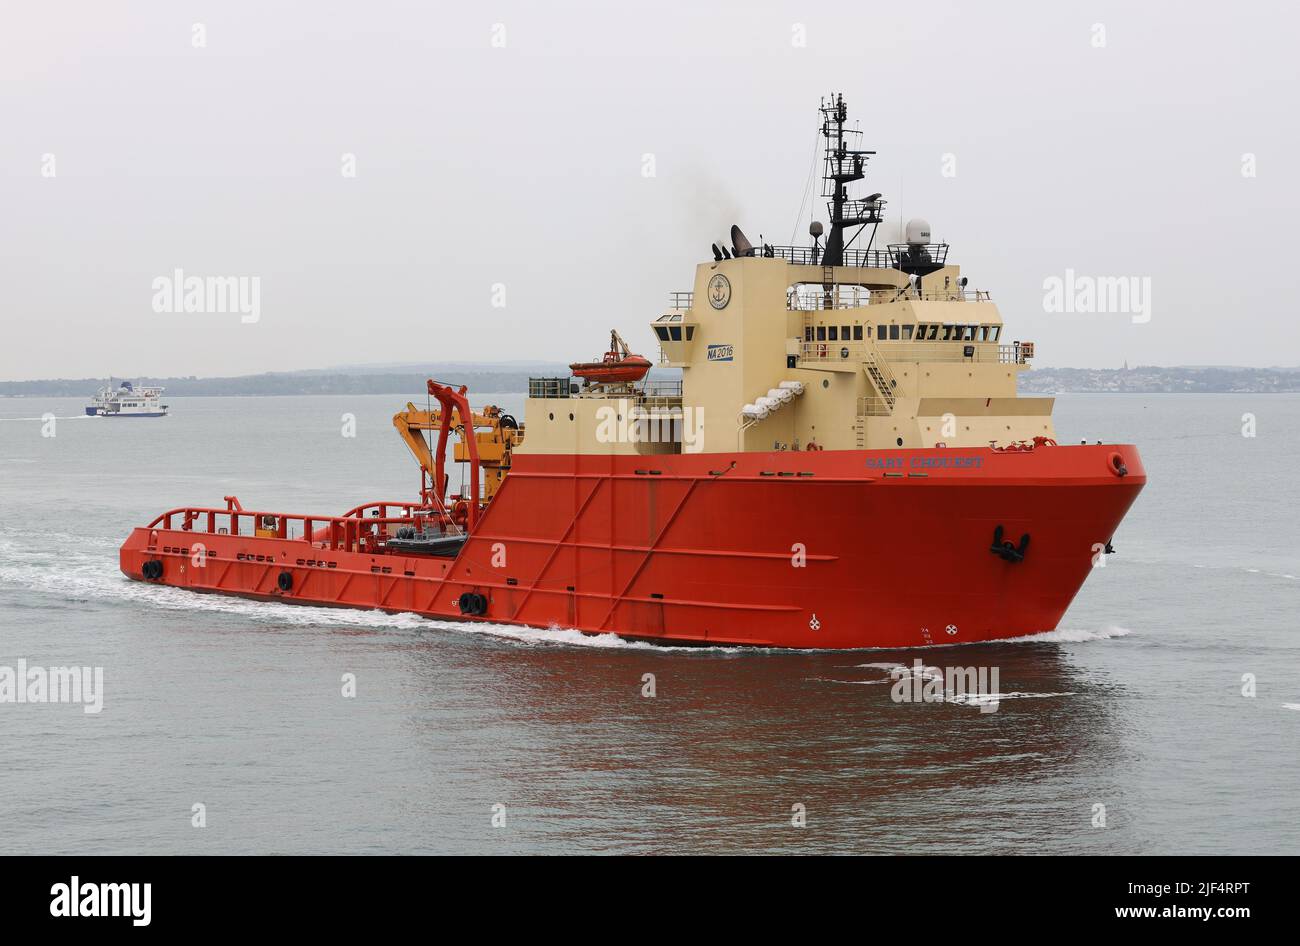 The United States offshore support ship GARY CHOUEST arriving at the Naval Base Stock Photo